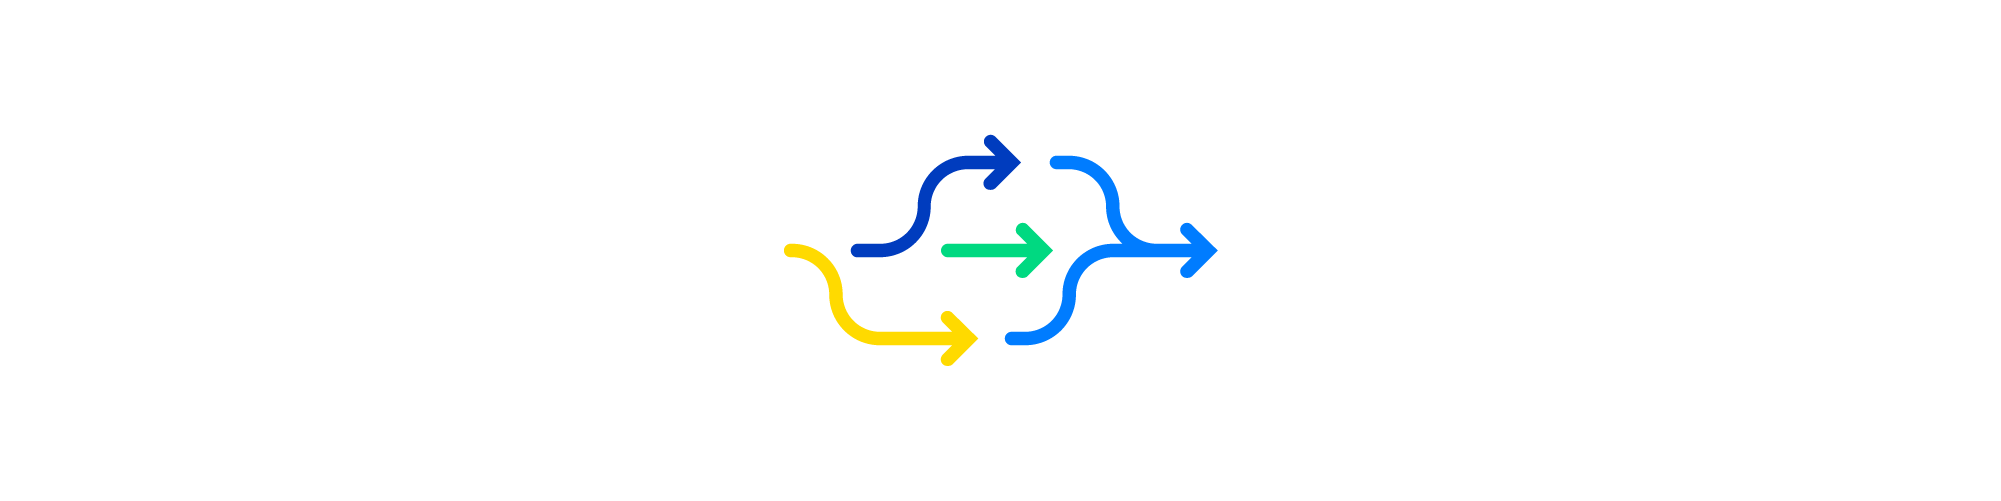 Illustration of directional vectors/arrows splitting and combining as a representation of flexibility